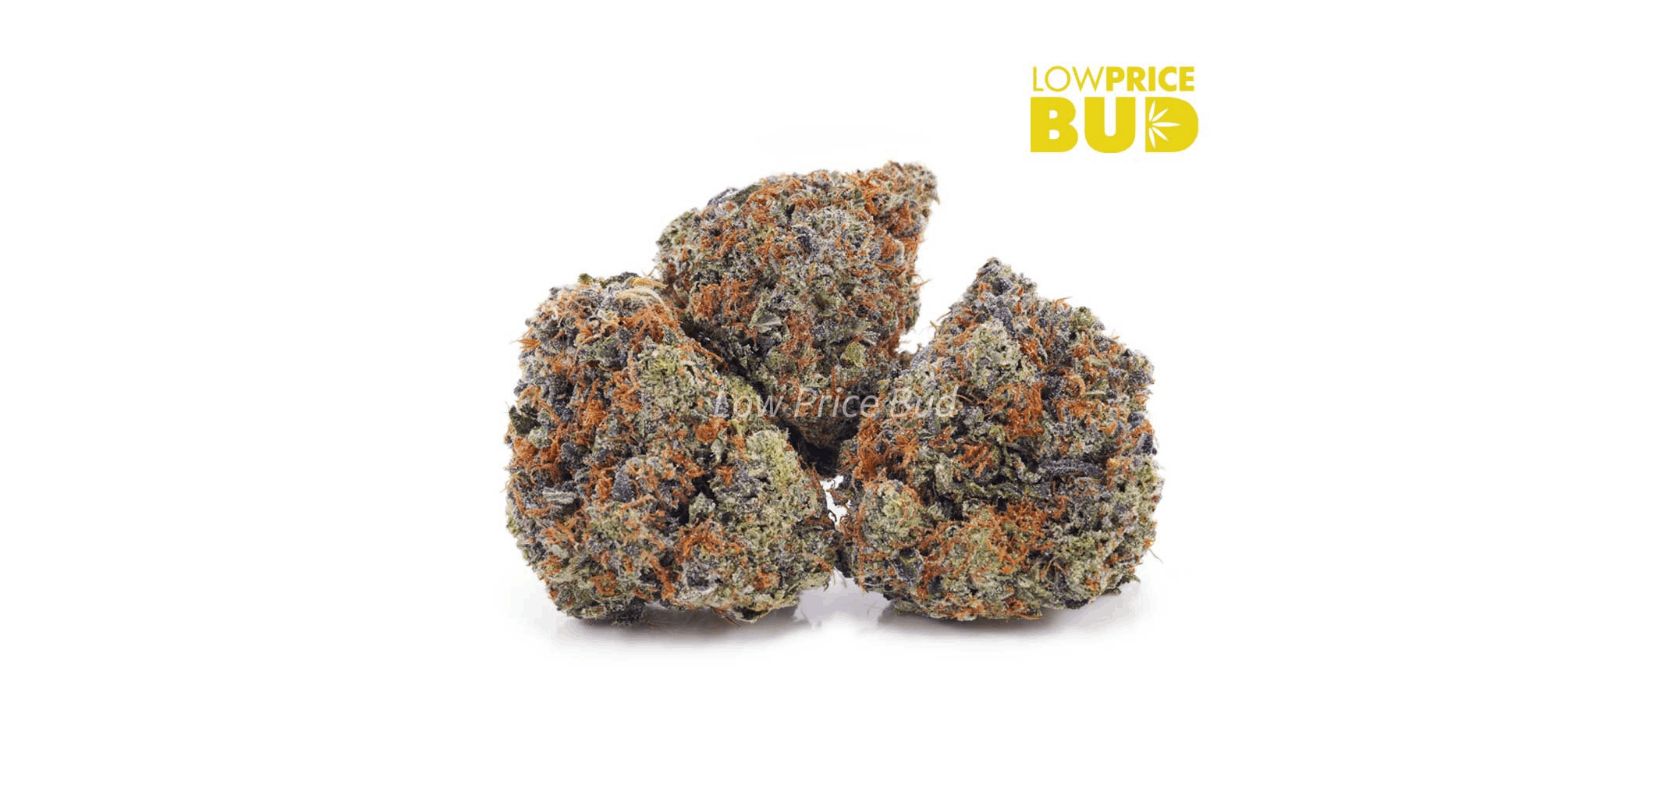 This strain is not to be confused with the incredible Bruce Banner strain, another sativa dominant hybrid named after the comic book legend's alter ego.